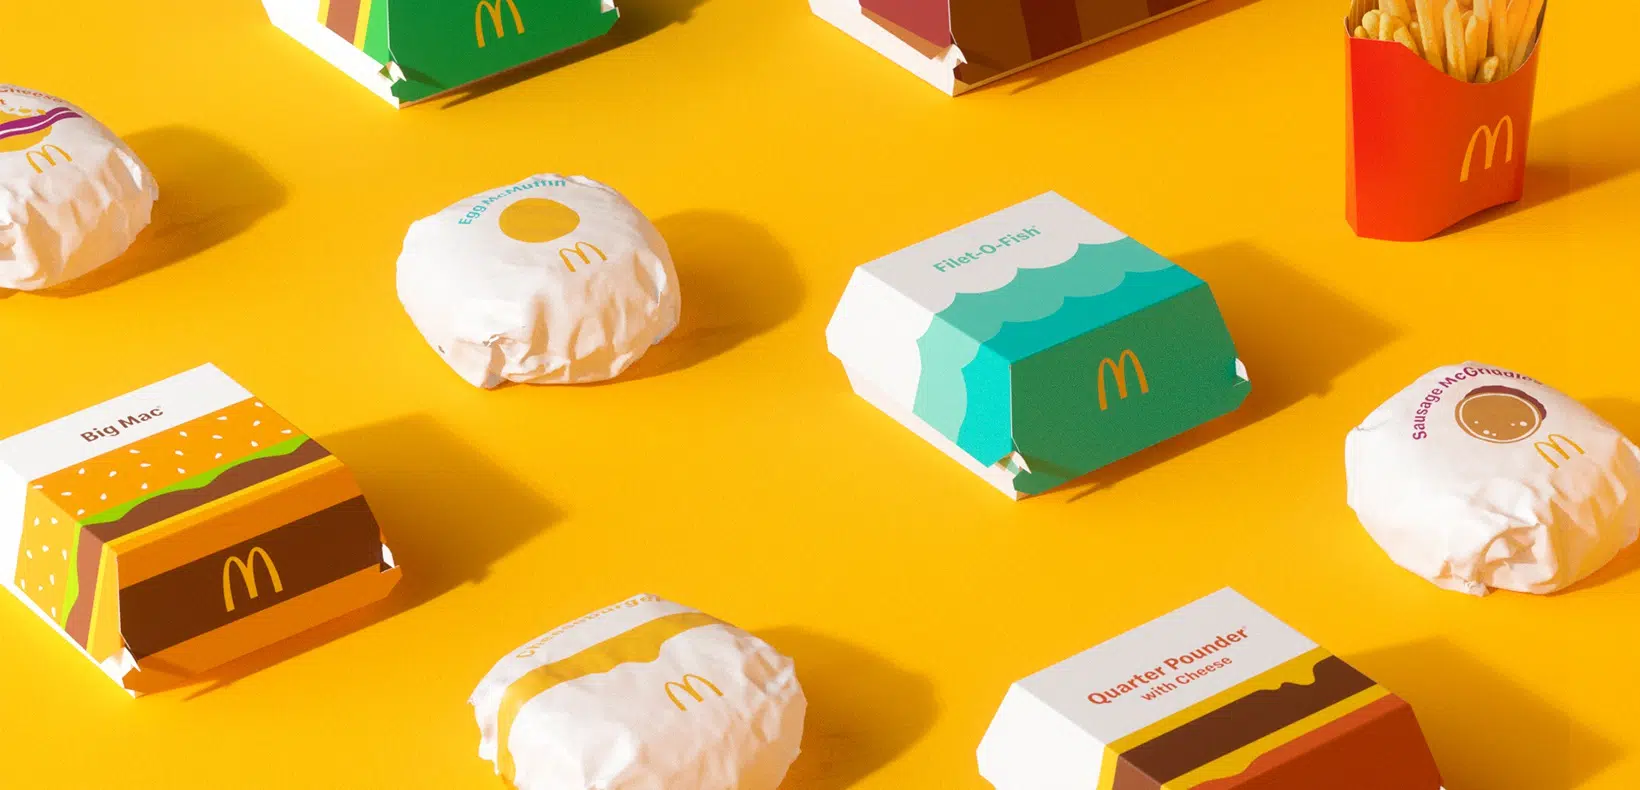 McDonald's introducing new packaging for a new decade